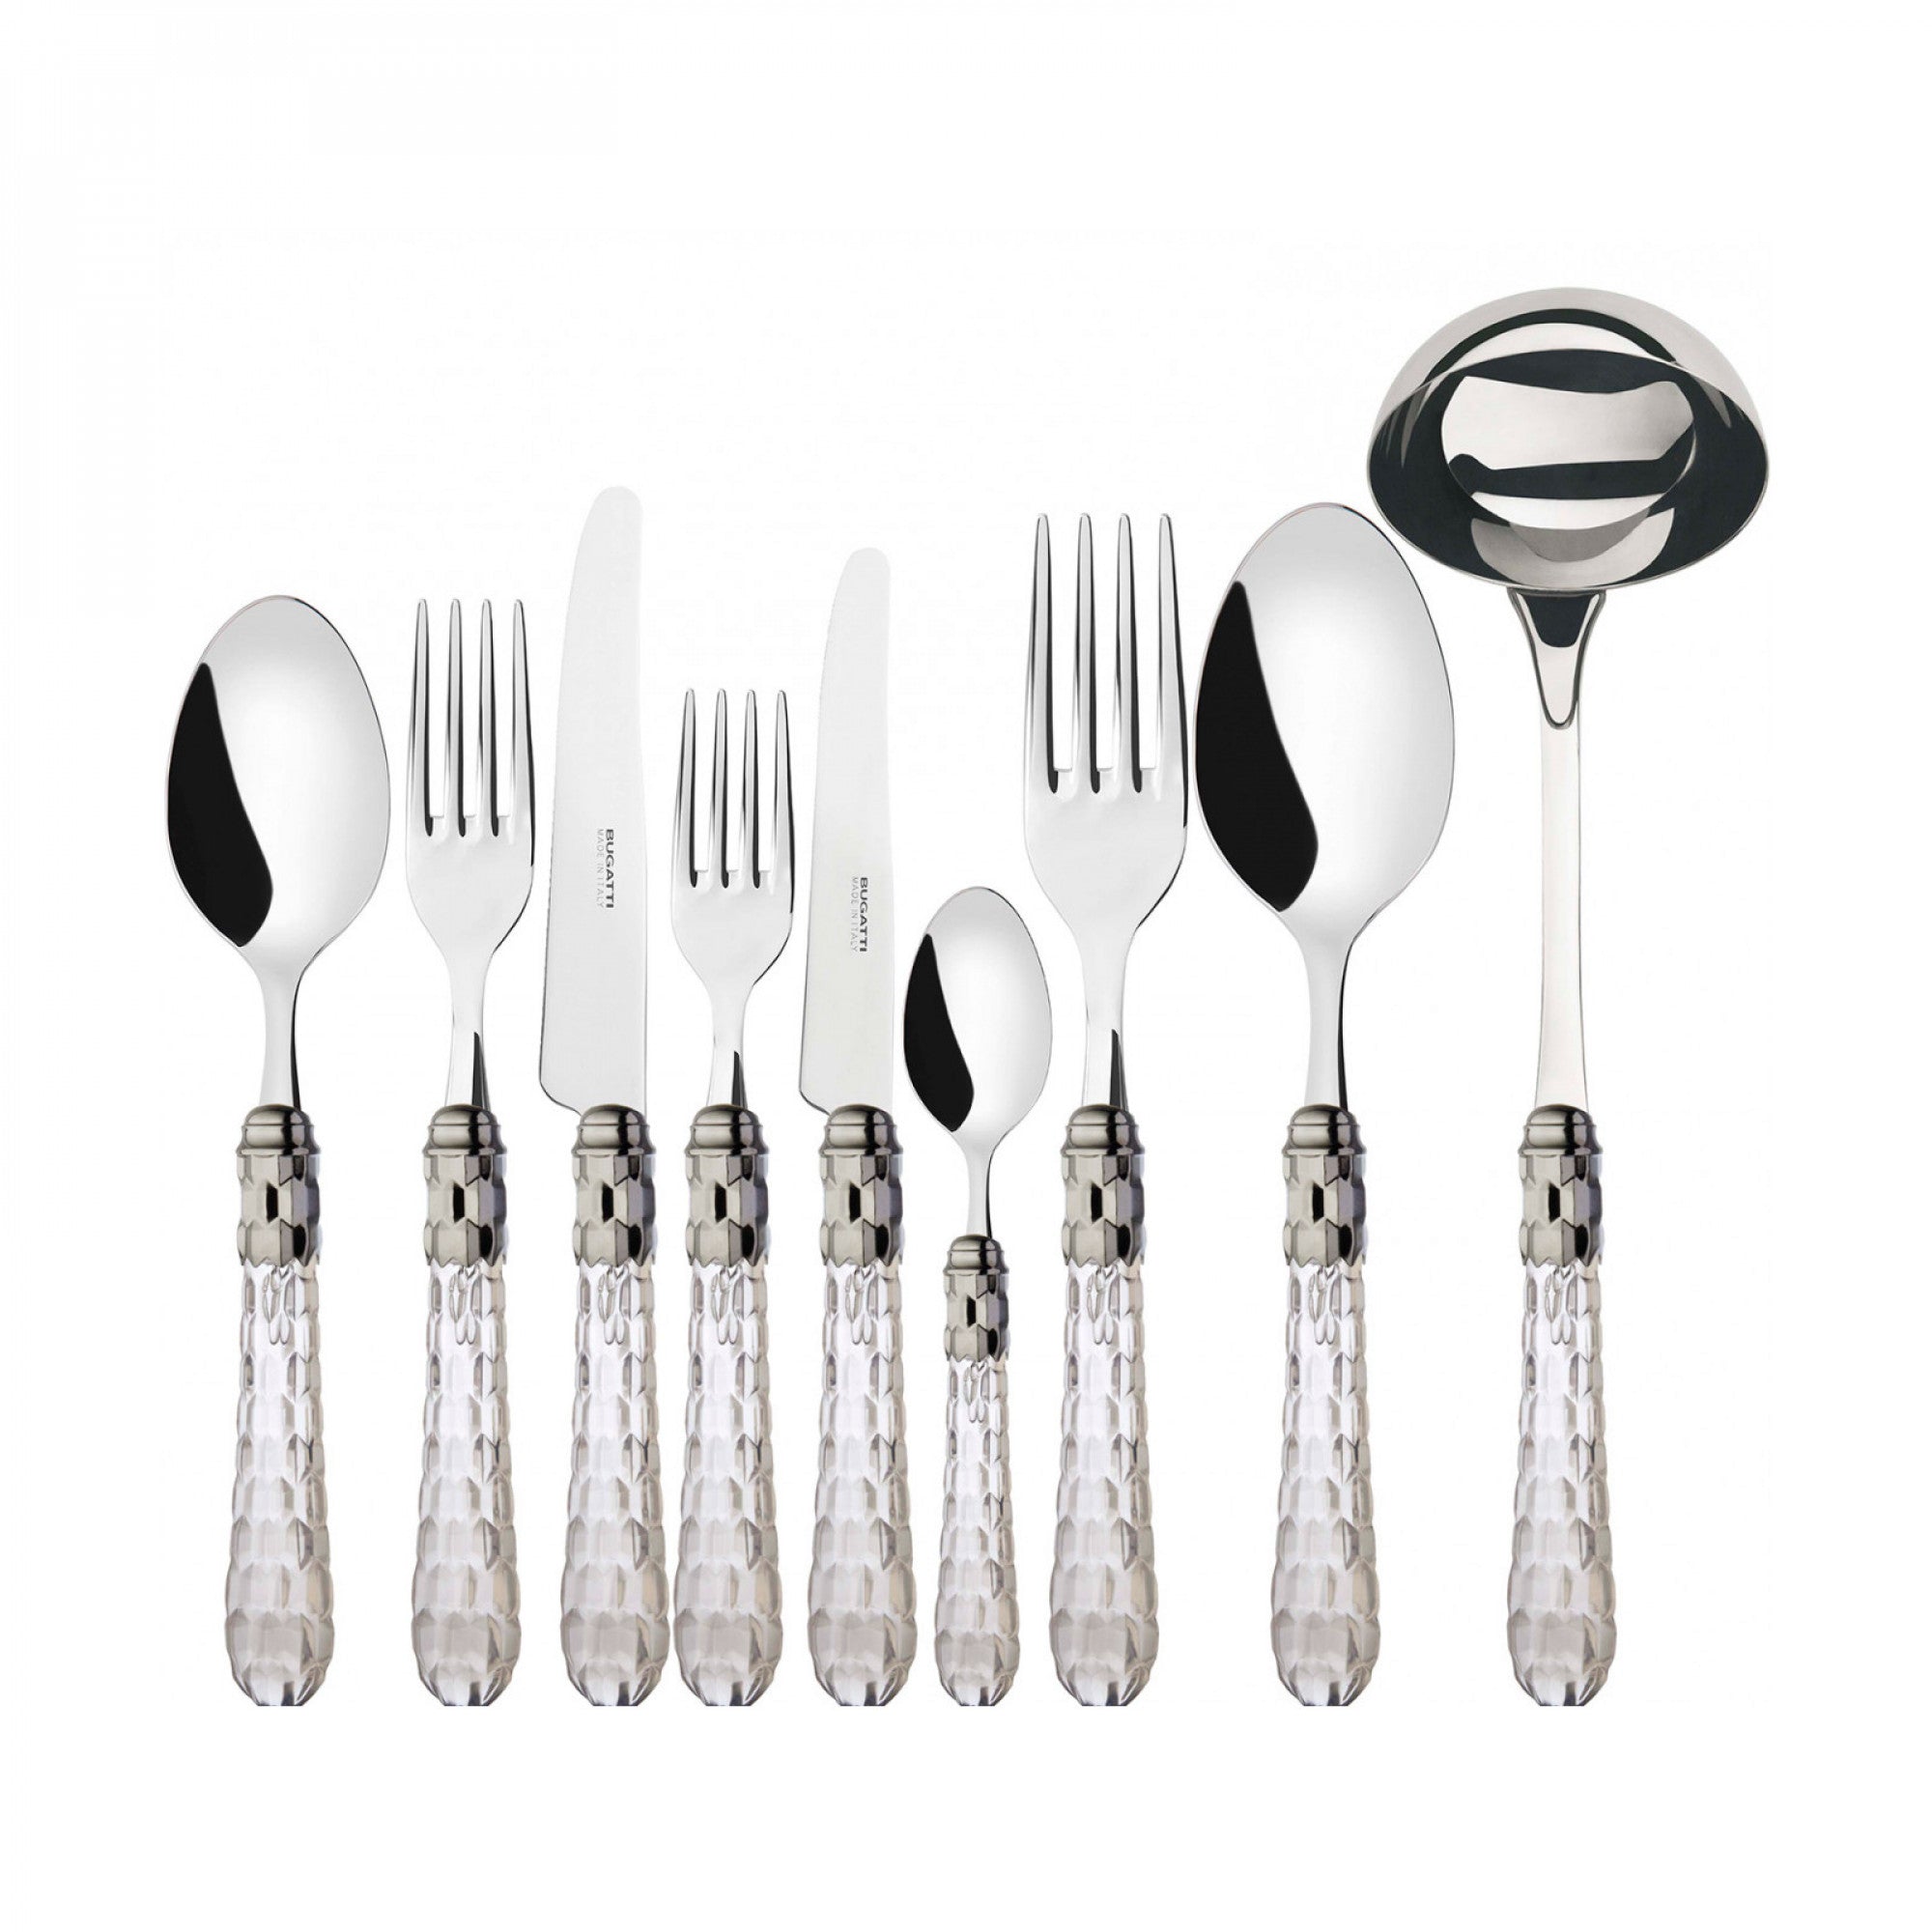 BUGATTI, Cristallo, 75-piece cutlery set in 18/10 stainless steel, chromed ring. Packaged in wooden case with wengé finish